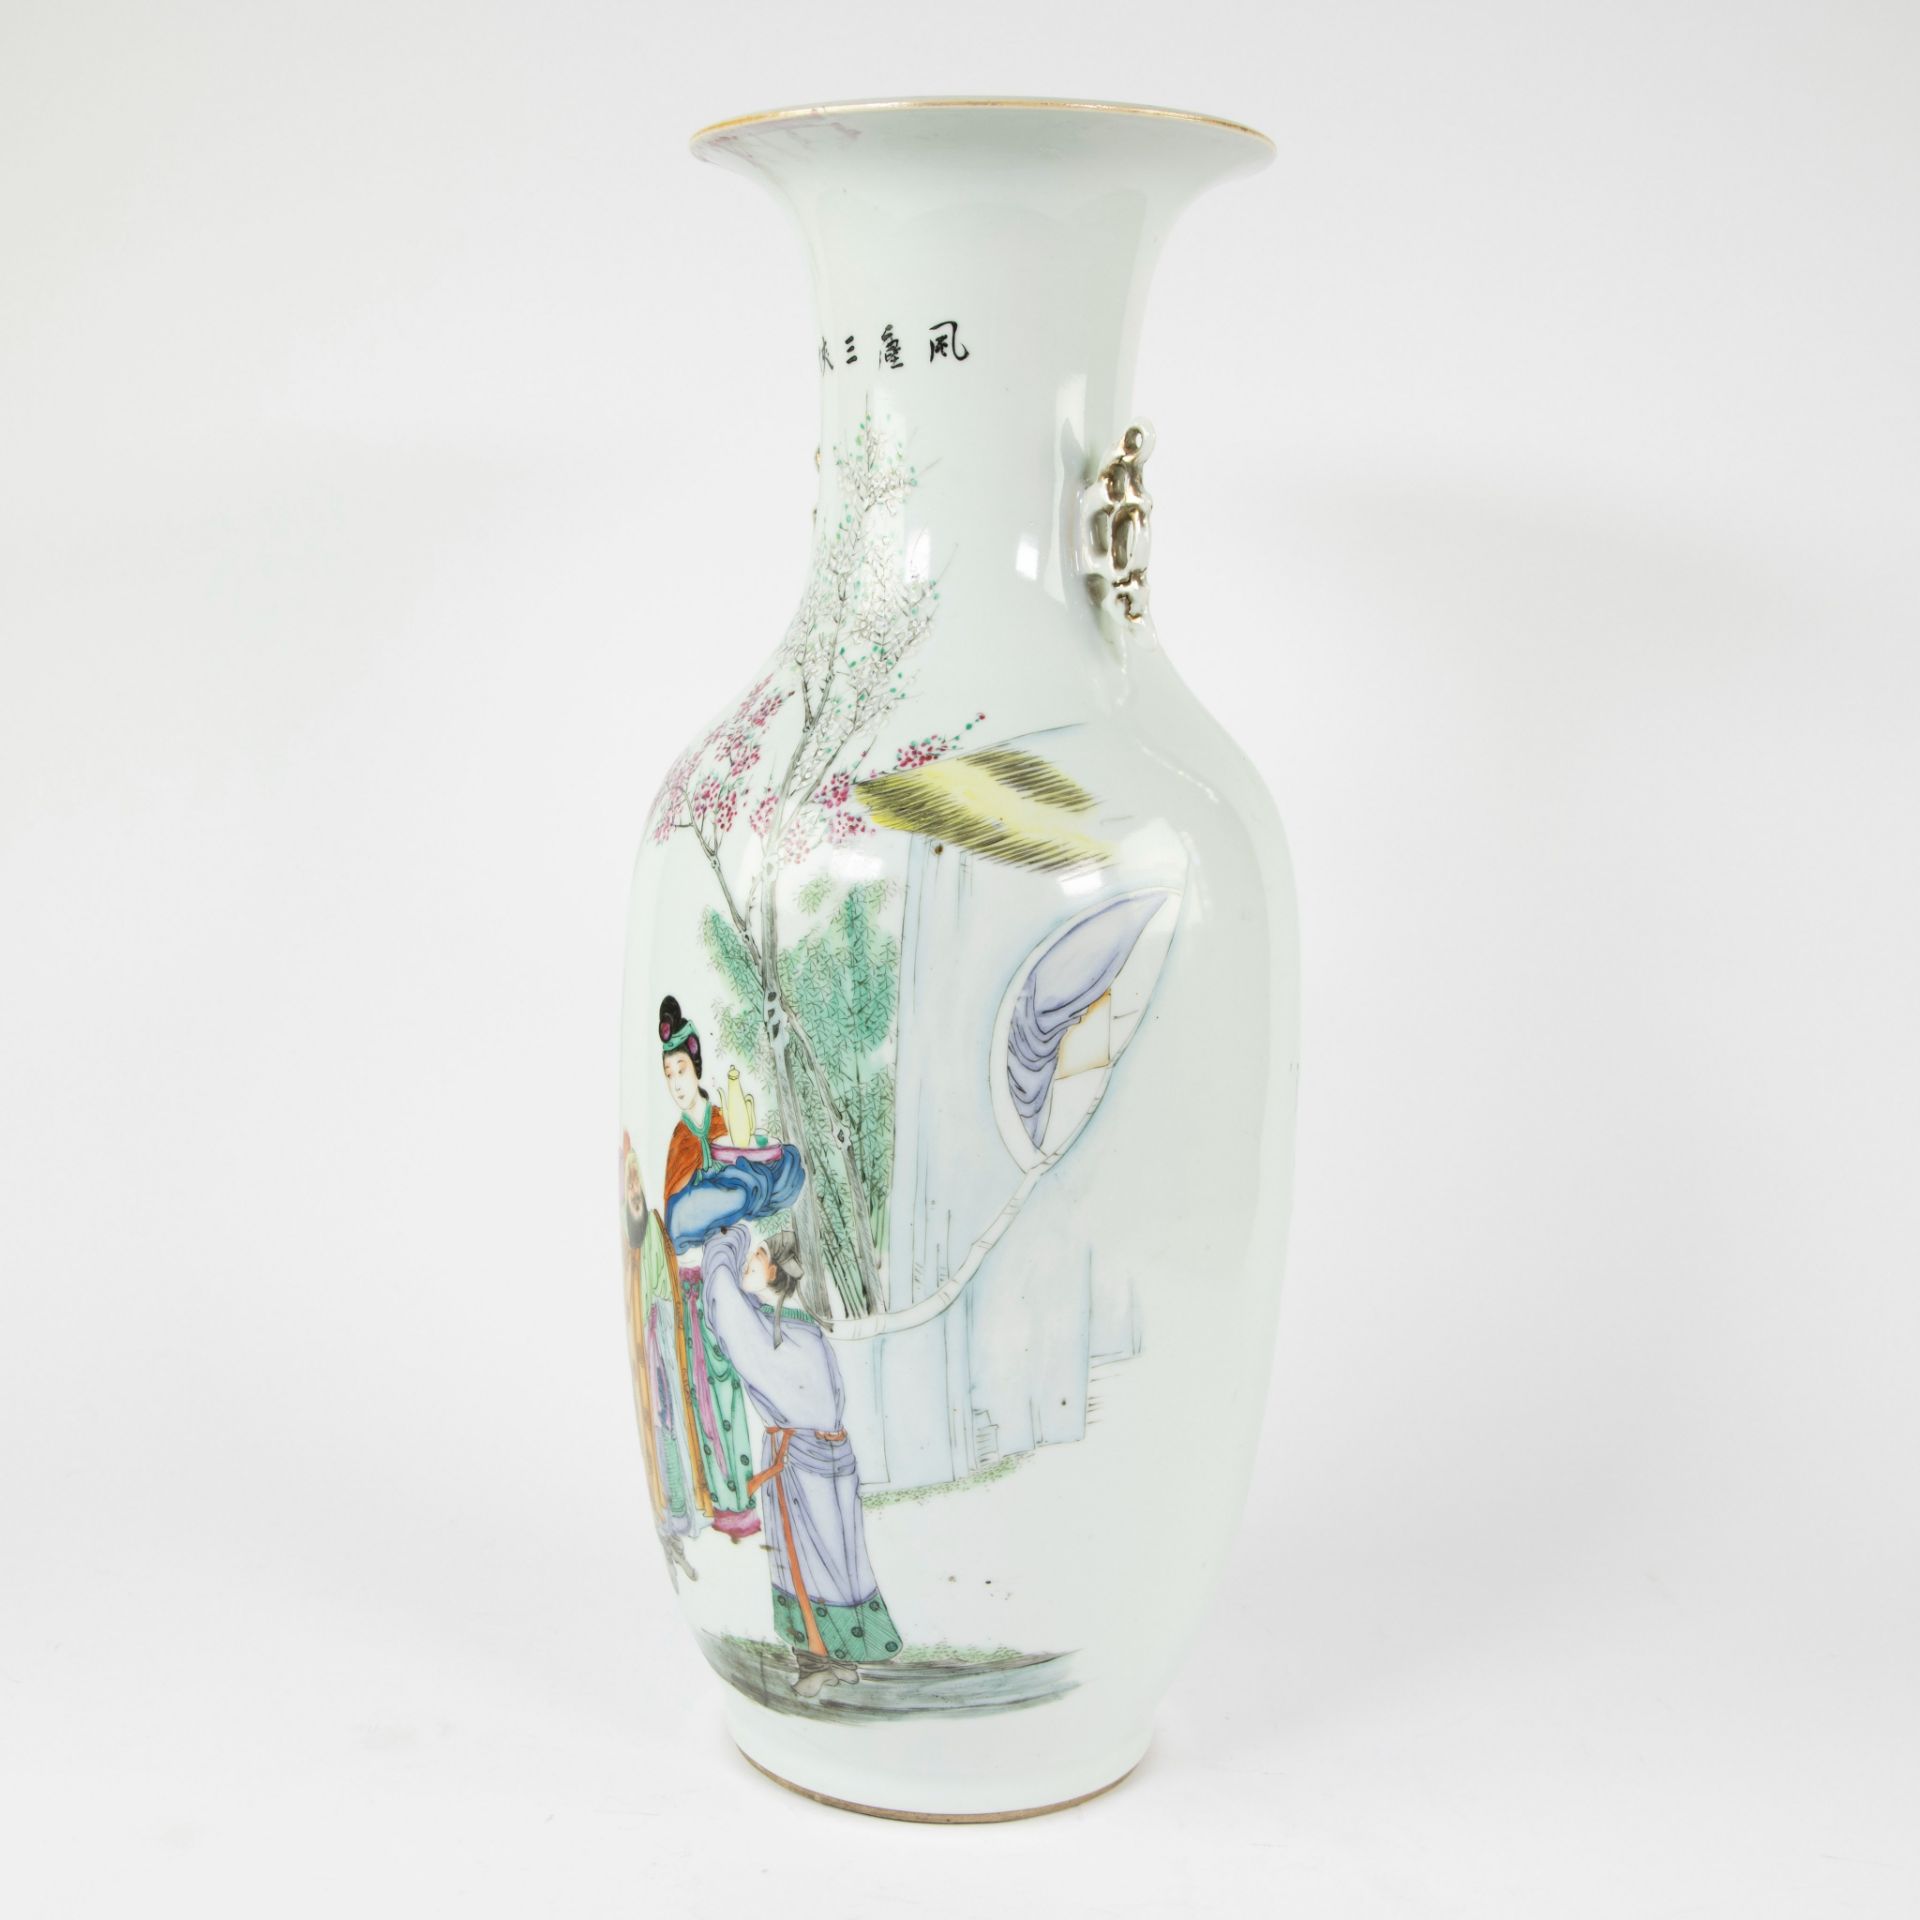 19th century Chinese famille rose vase decorated with figures and Chinese texts - Image 2 of 11